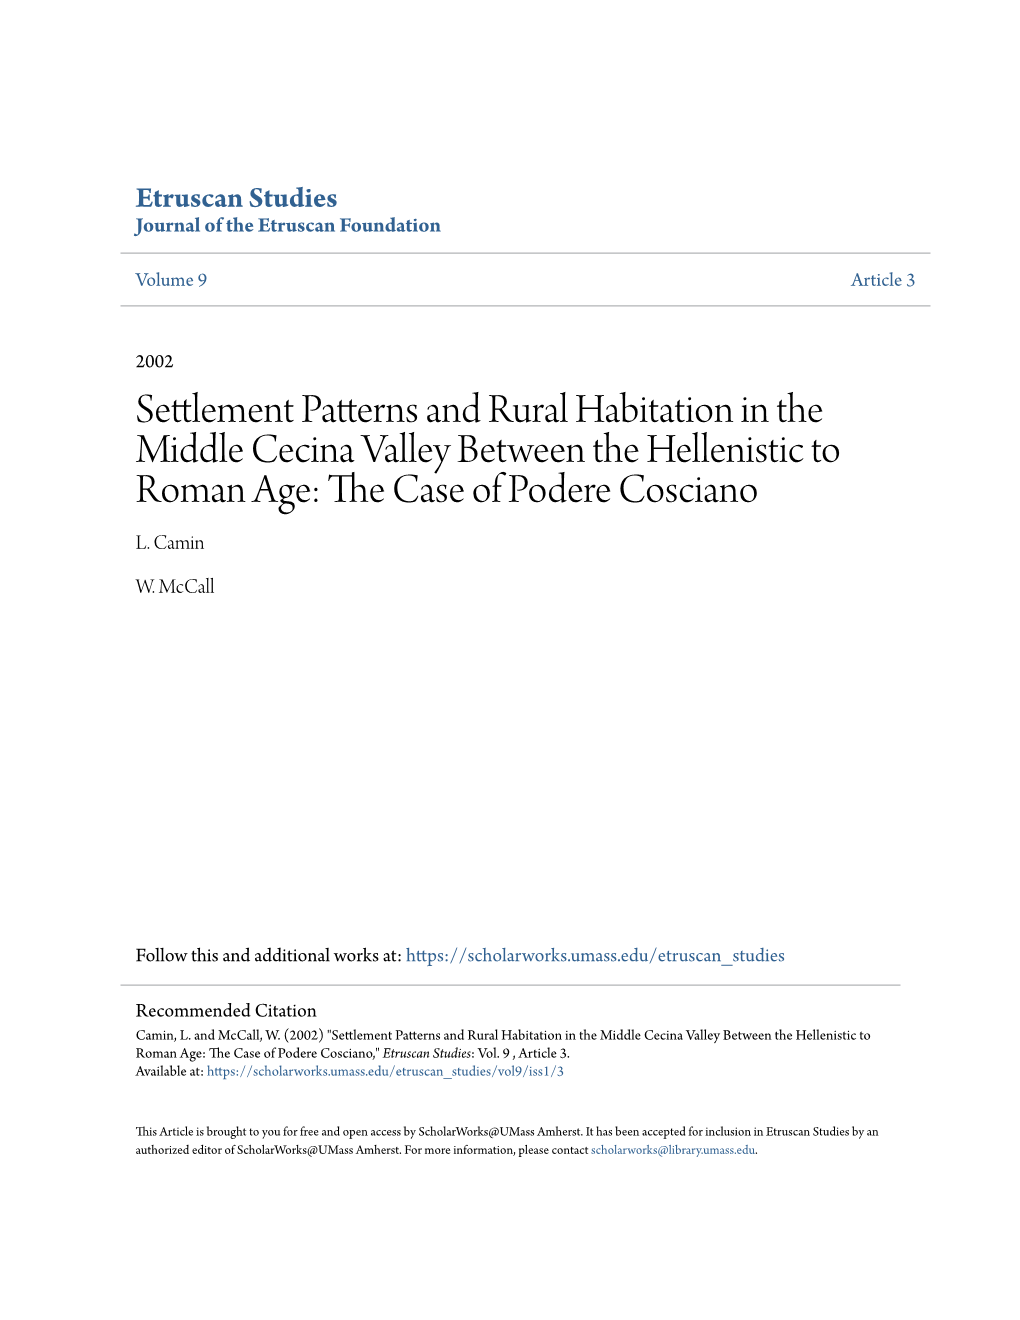 Settlement Patterns and Rural Habitation in the Middle Cecina Valley Between the Hellenistic to Roman Age: the Ac Se of Podere Cosciano L